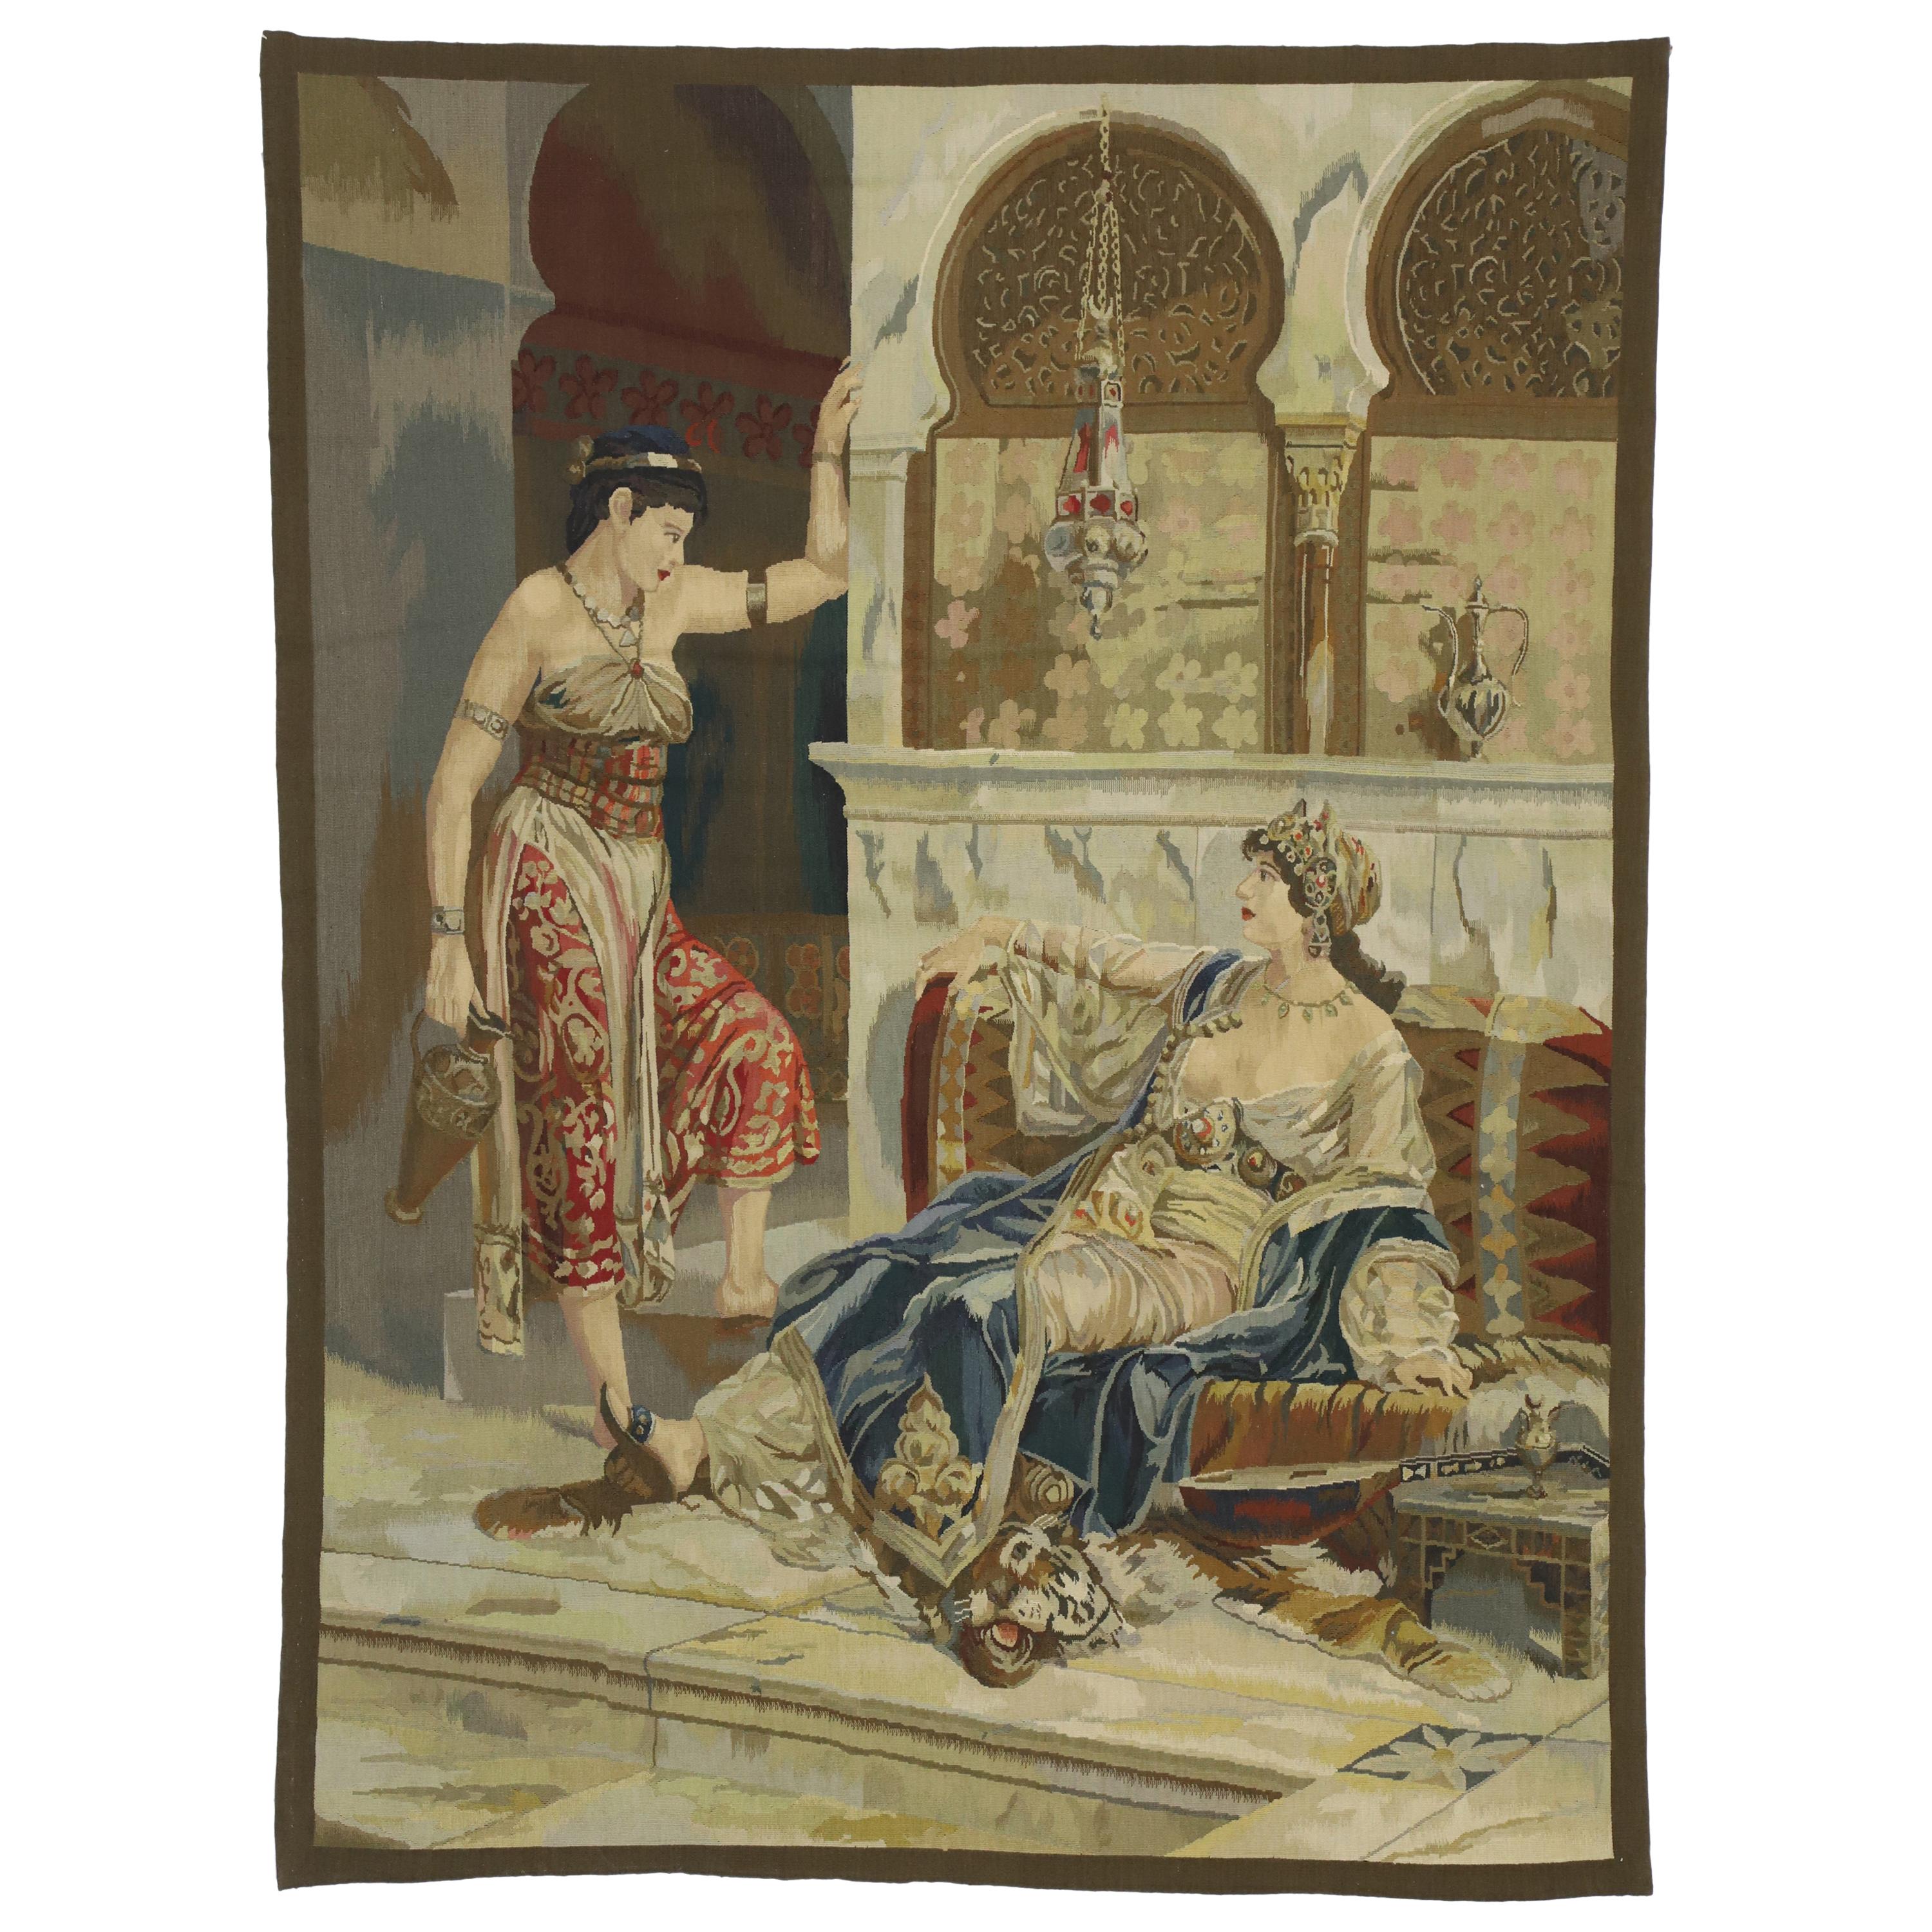 Imperial Harem Odalisque Tapestry with Ottoman Empire Style, Wall Hanging For Sale